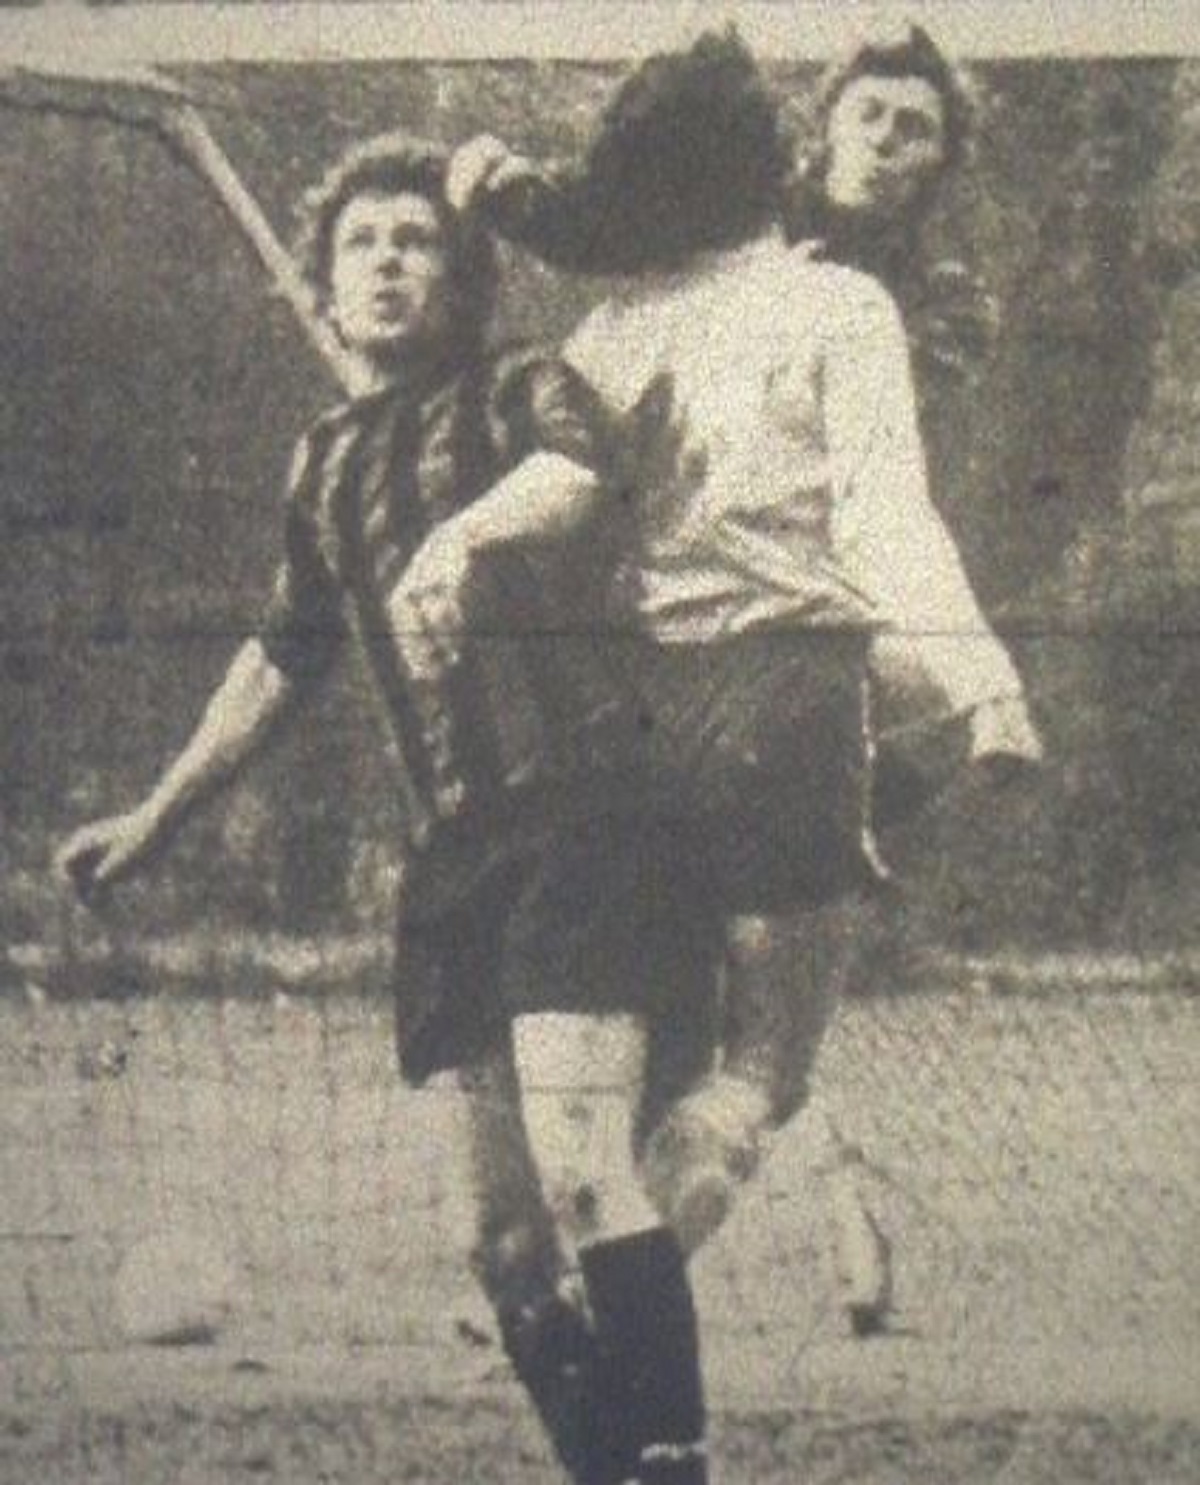 Thick of the action - Live and Let Live defender Terry Simmons (light shirt) clears from an Elmstead attacker. This picture was taken during one of the 1973/74 League Cup semi-finals. Live and Let Live ended up winning 3-2